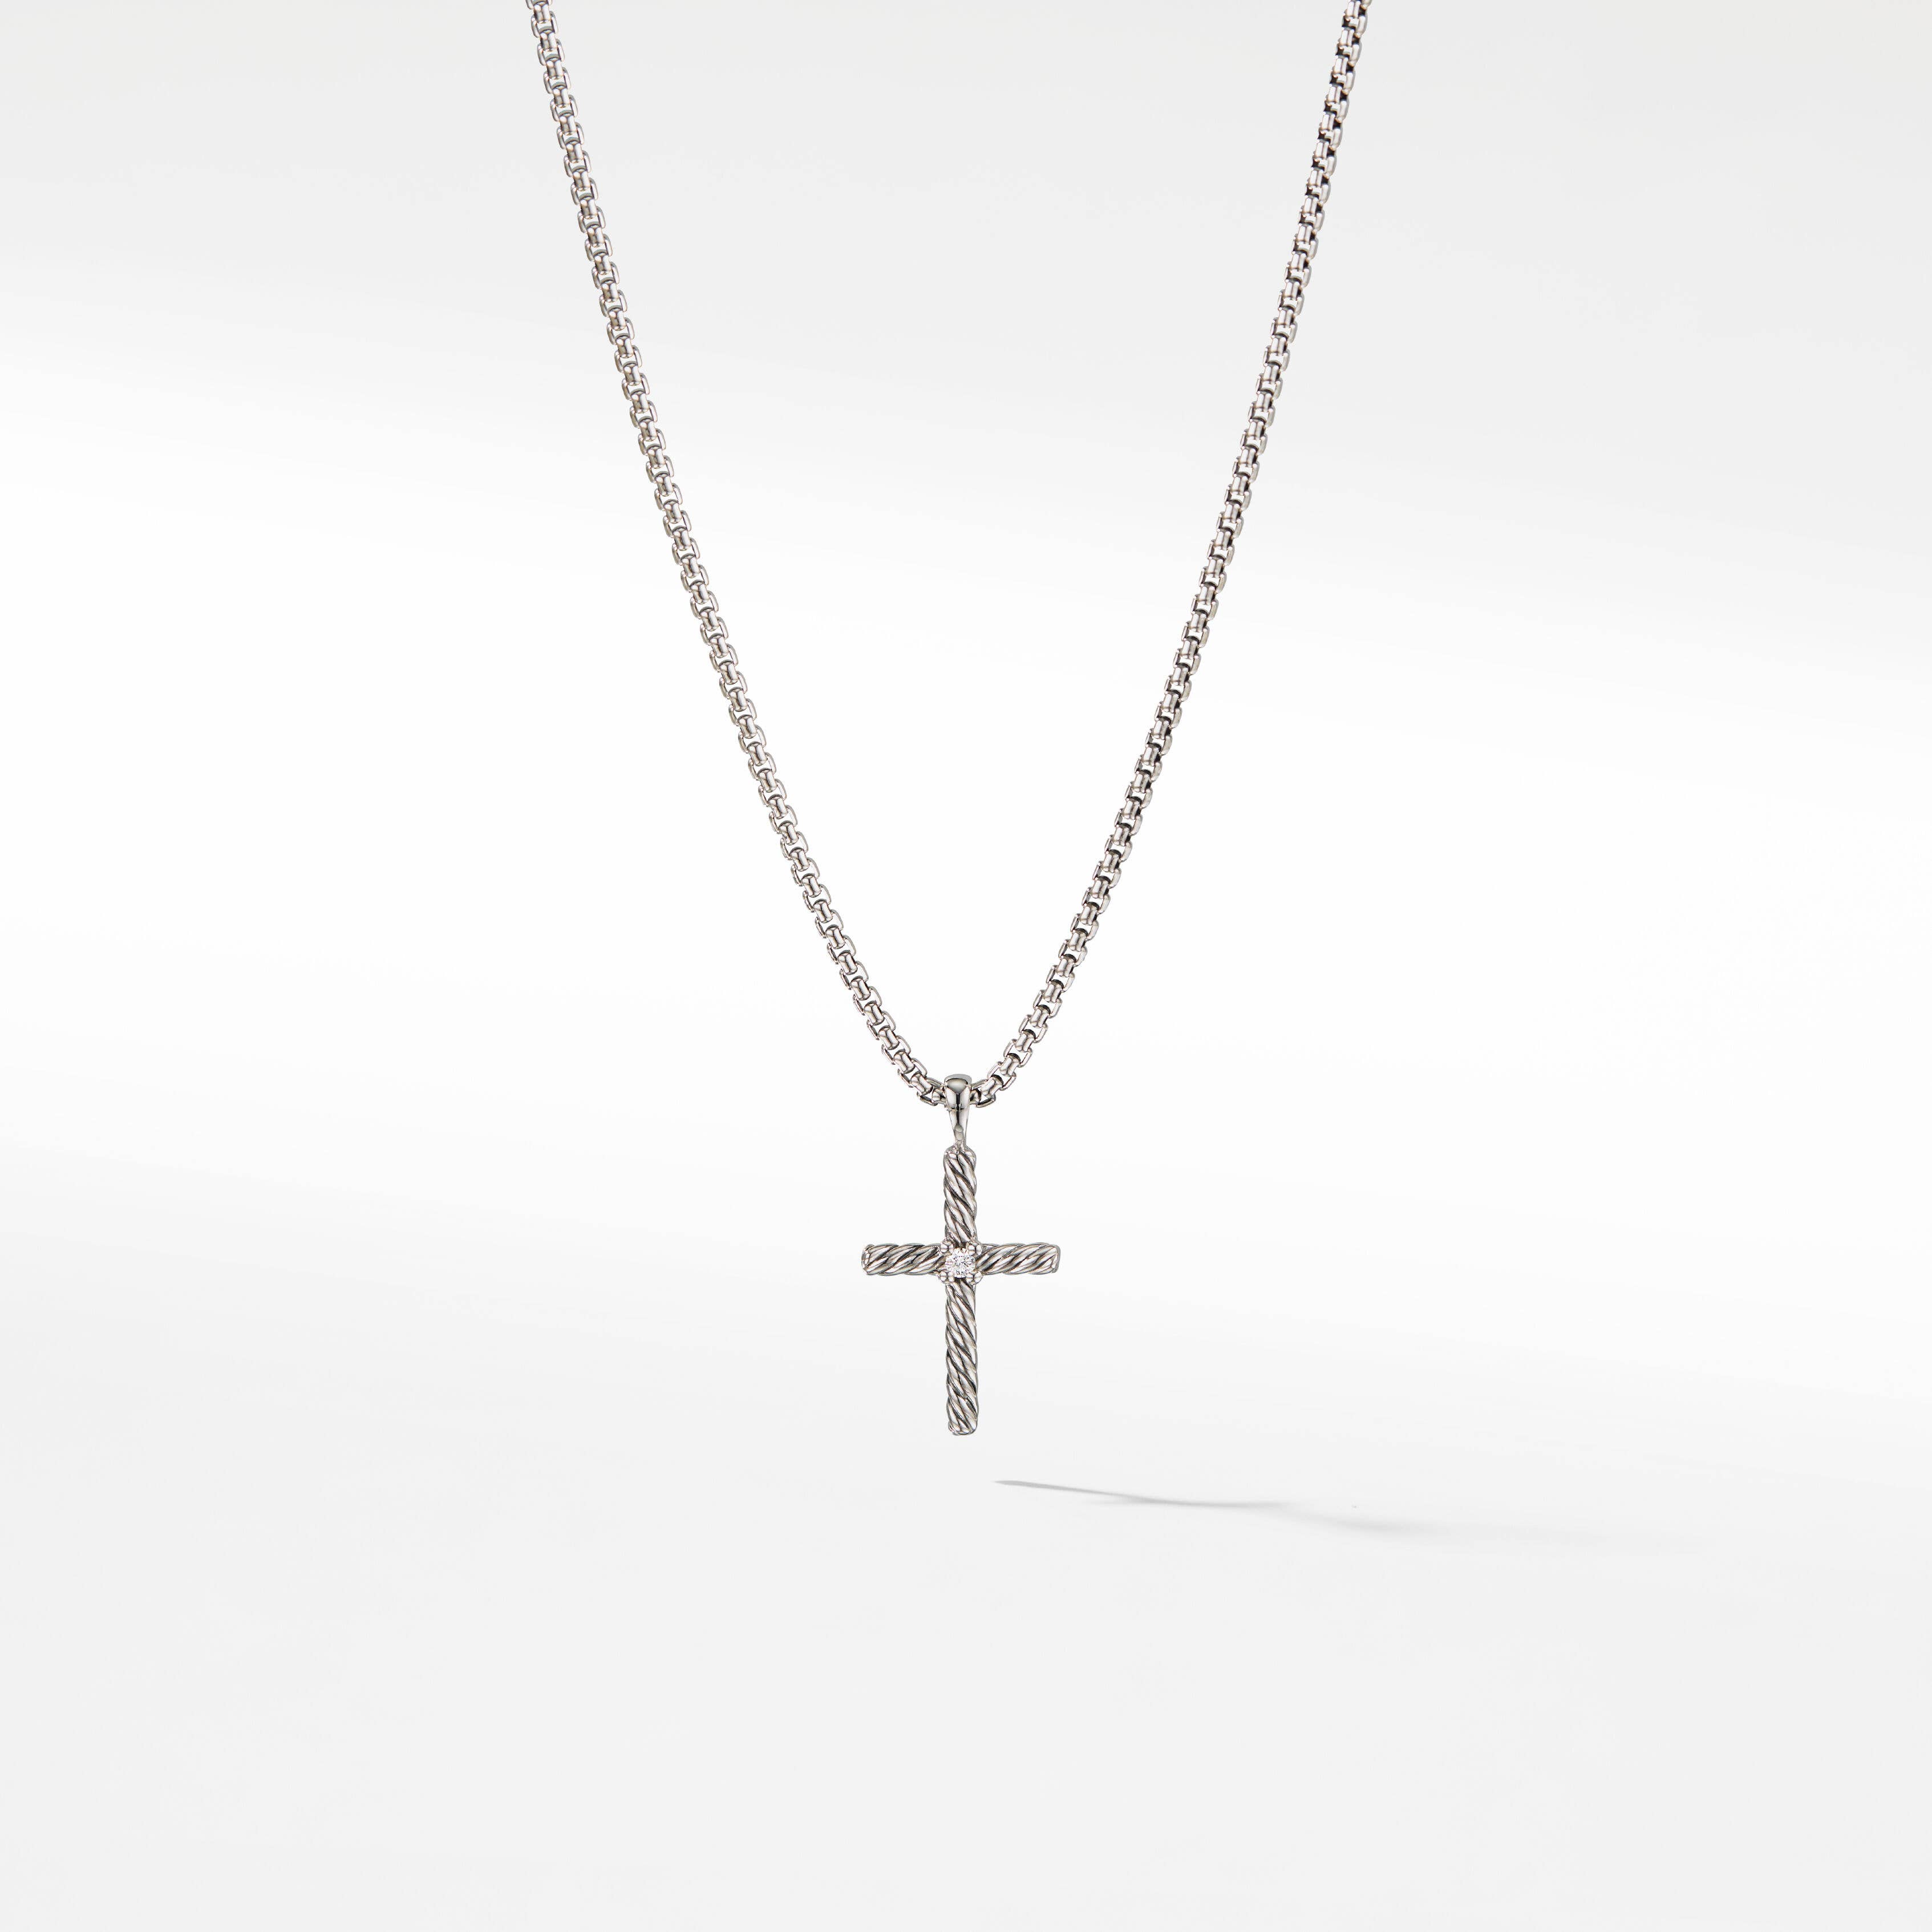 Cable Classics Cross Necklace in Sterling Silver with Center Diamond